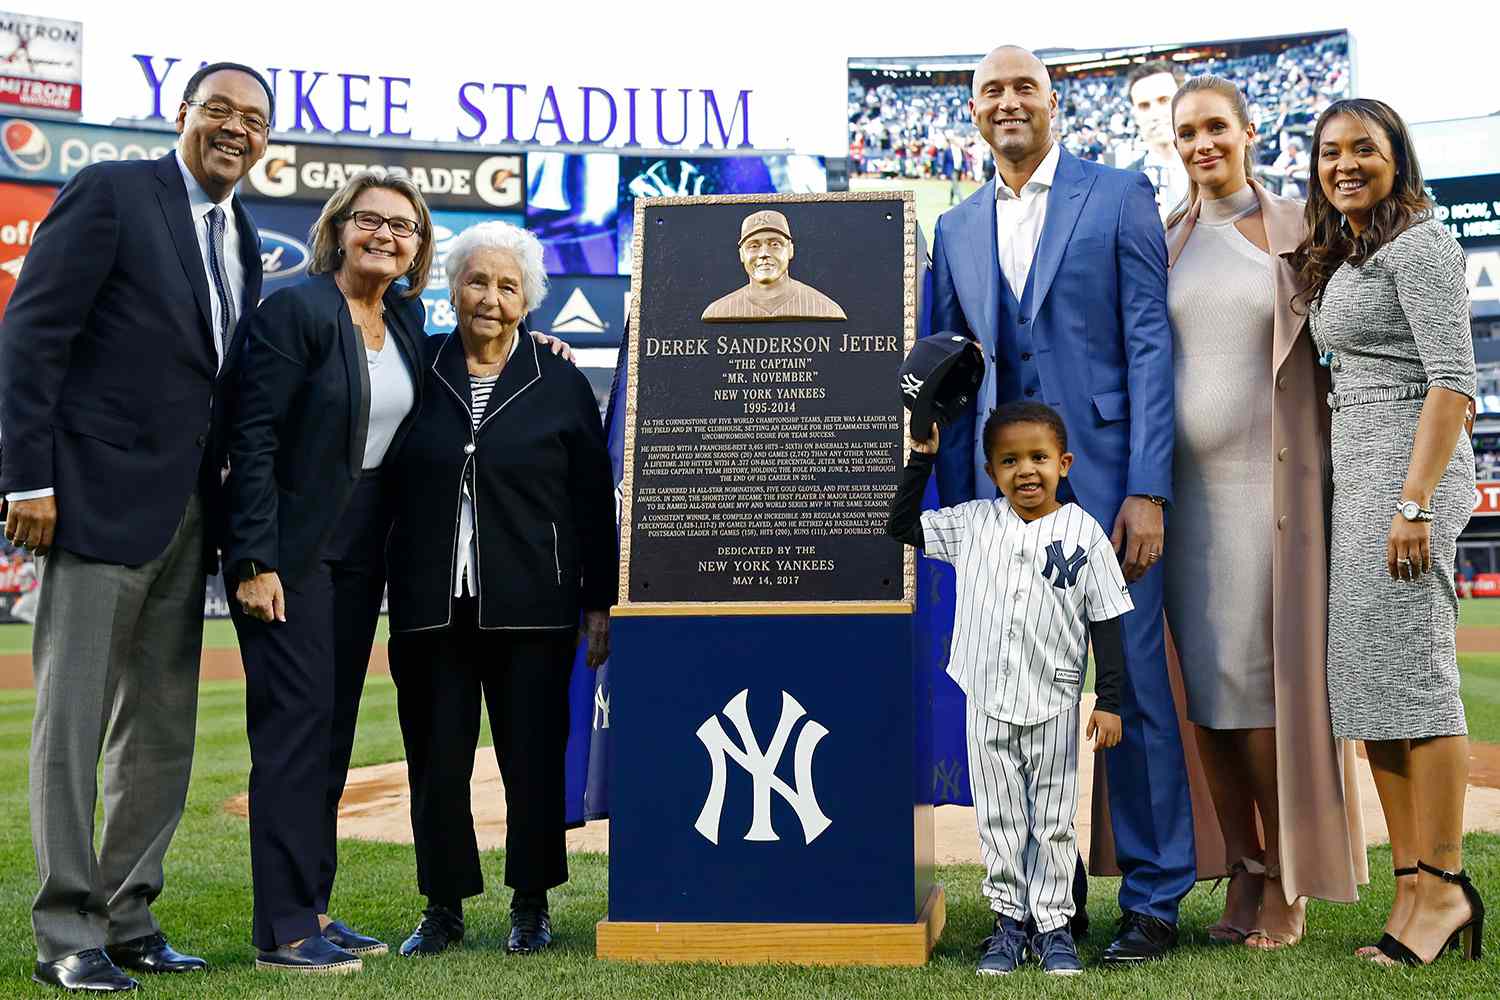 Mandatory Credit: Photo by AP/Shutterstock (8820989at) Derek Jeter, Hannah Jeter Retired New York Yankees shortstop Derek Jeter, third from right, poses with his family and the monument that will represent him in Yankee Stadium's Monument Park during an on-field, pregame, ceremony retiring Jeter's number 2 in New York, . From left are Jeter's parents Charles and Dorothy Jeter, his grandmother "Dot" Jeter, Jeter's nephew Jaden, his wife Hannah Jeter and sister Sharlee Jeter Yankees Jeter, New York, USA - 14 May 2017